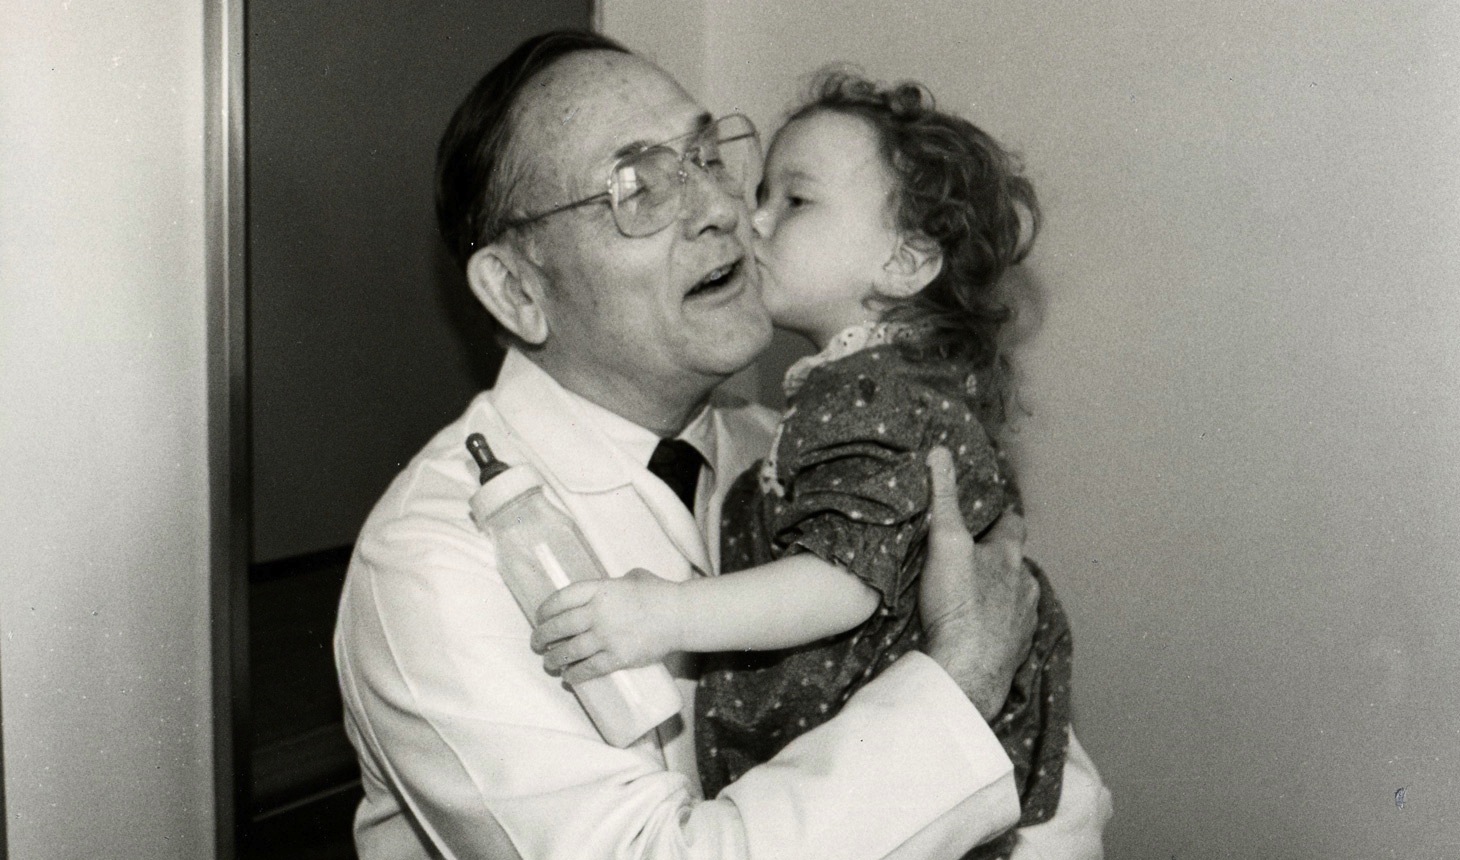 W. Hardy Hendren III, MD, D’47, MED’50 is shown here with a pediatric patient.